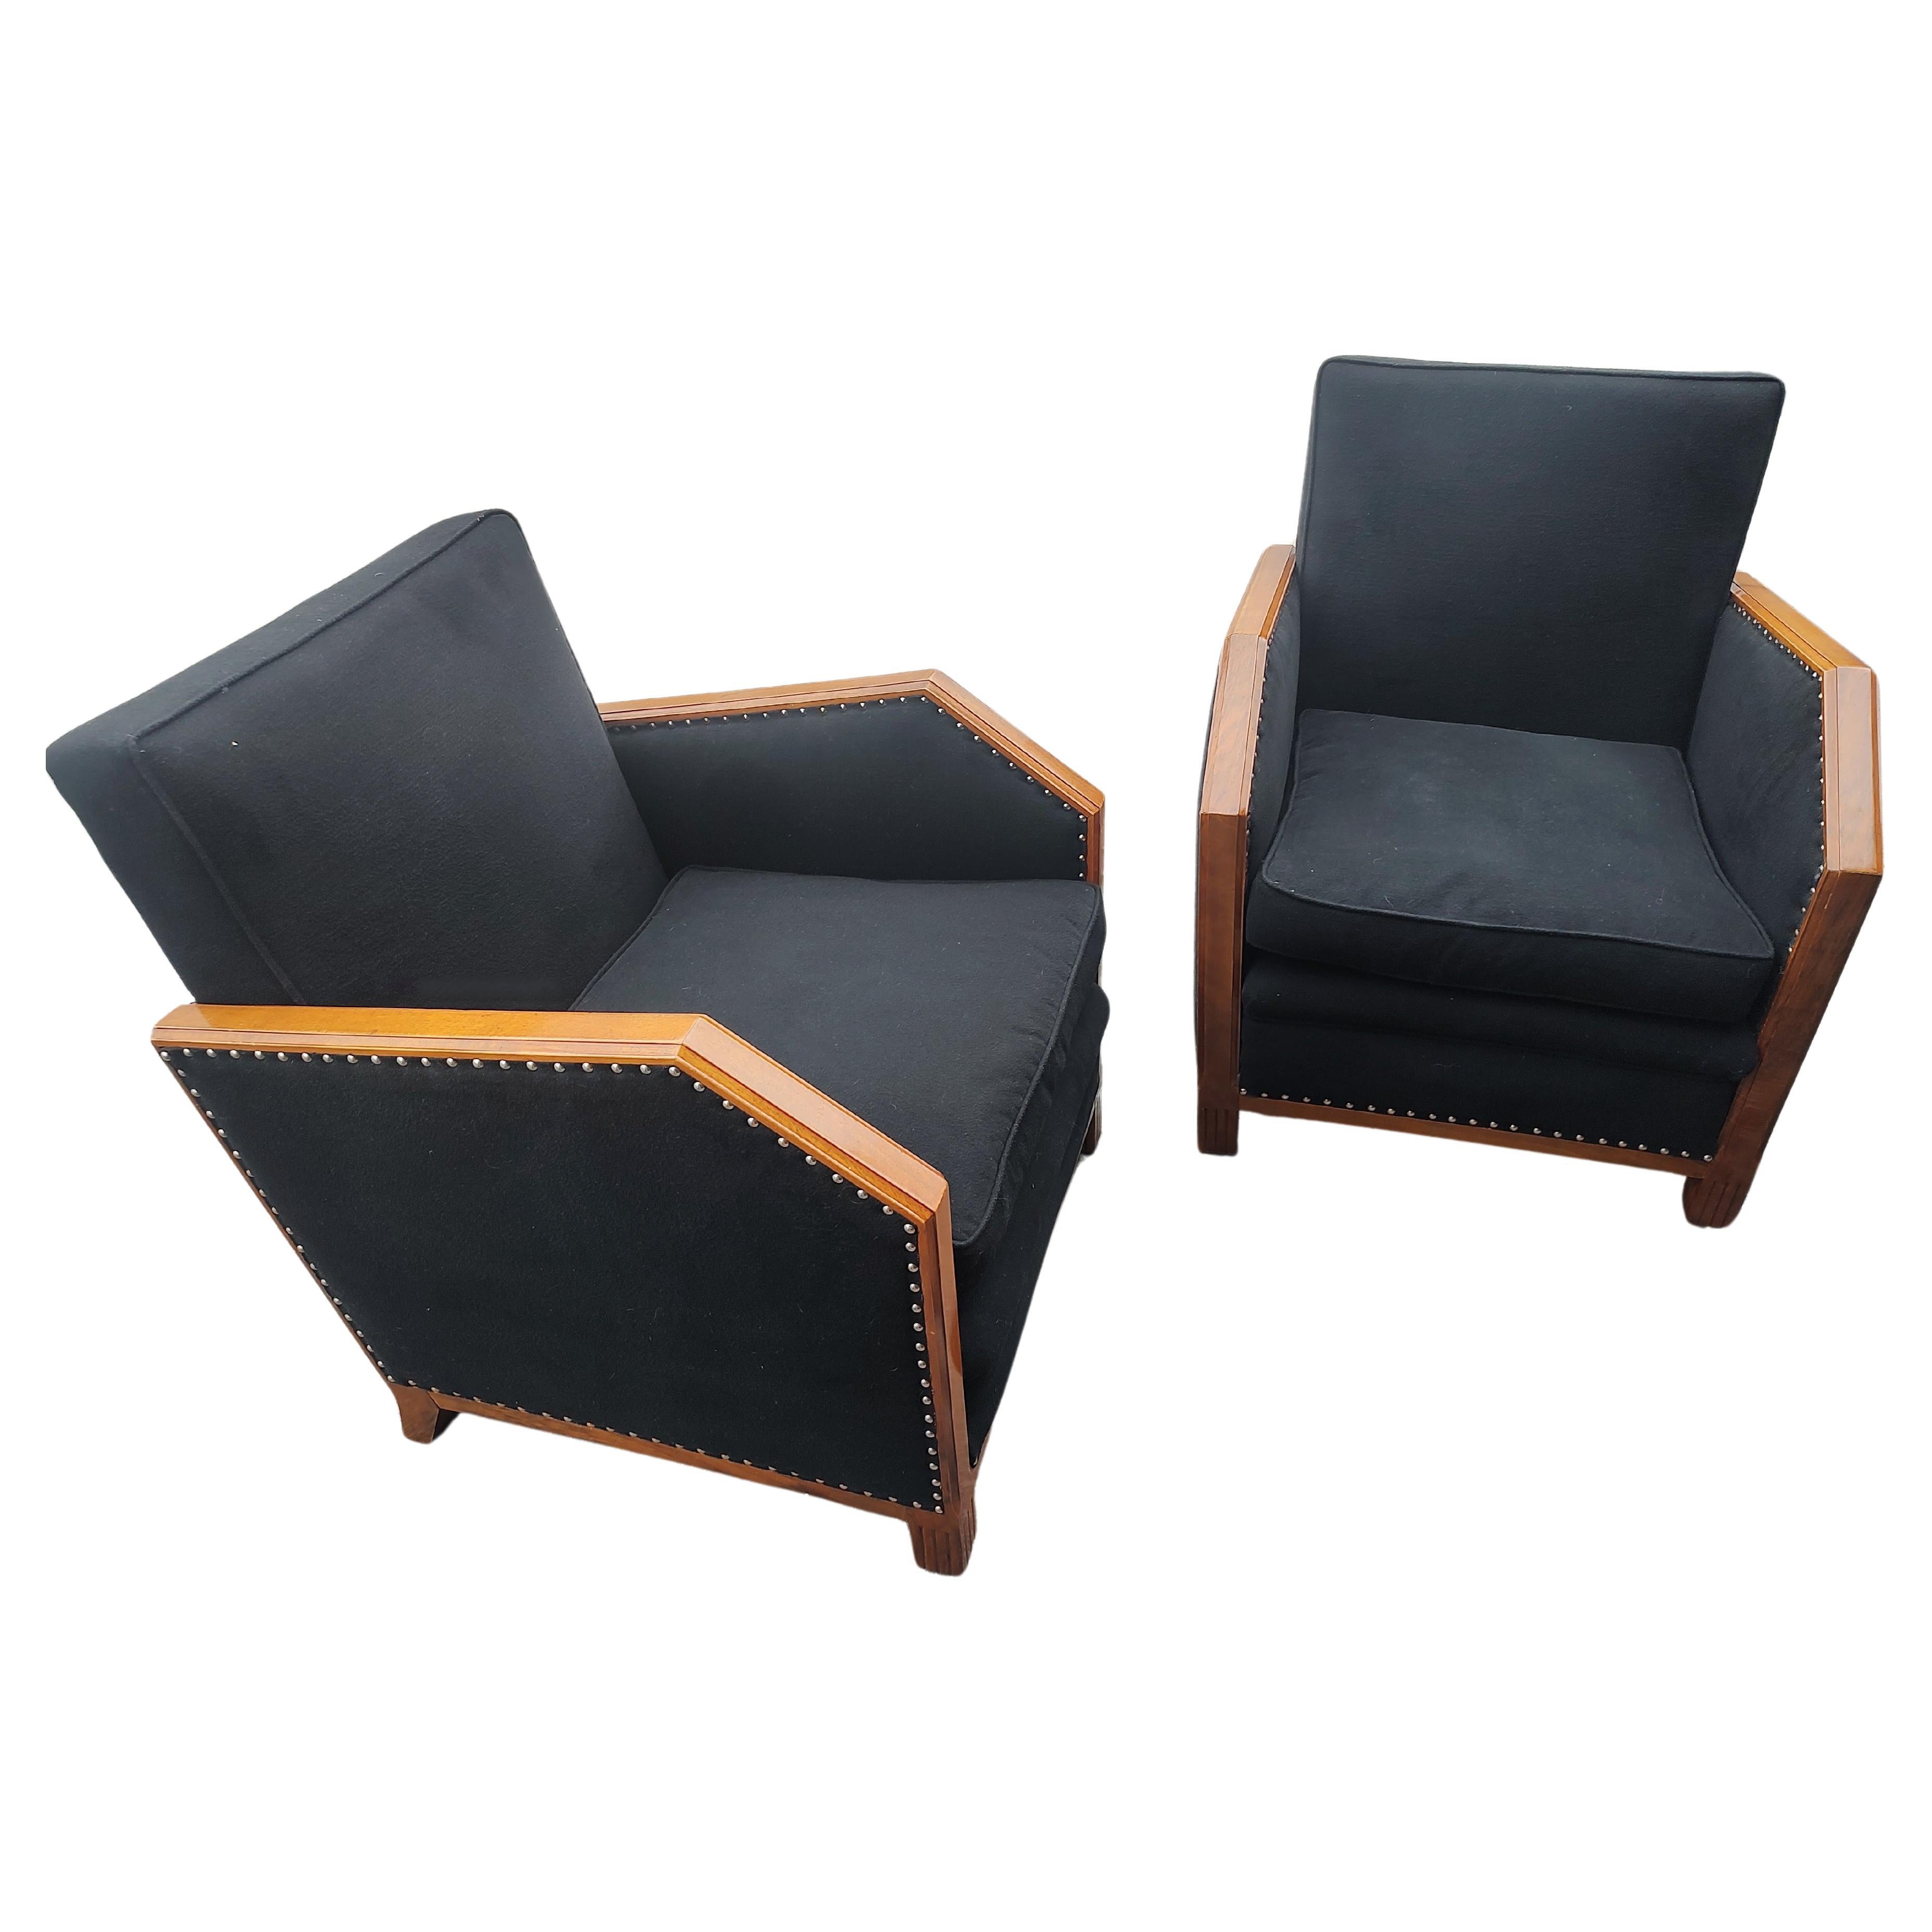 Pair of Rosewood Art Deco Club Chairs with Felt Upholstery & Brass Tacks C1935 For Sale 3